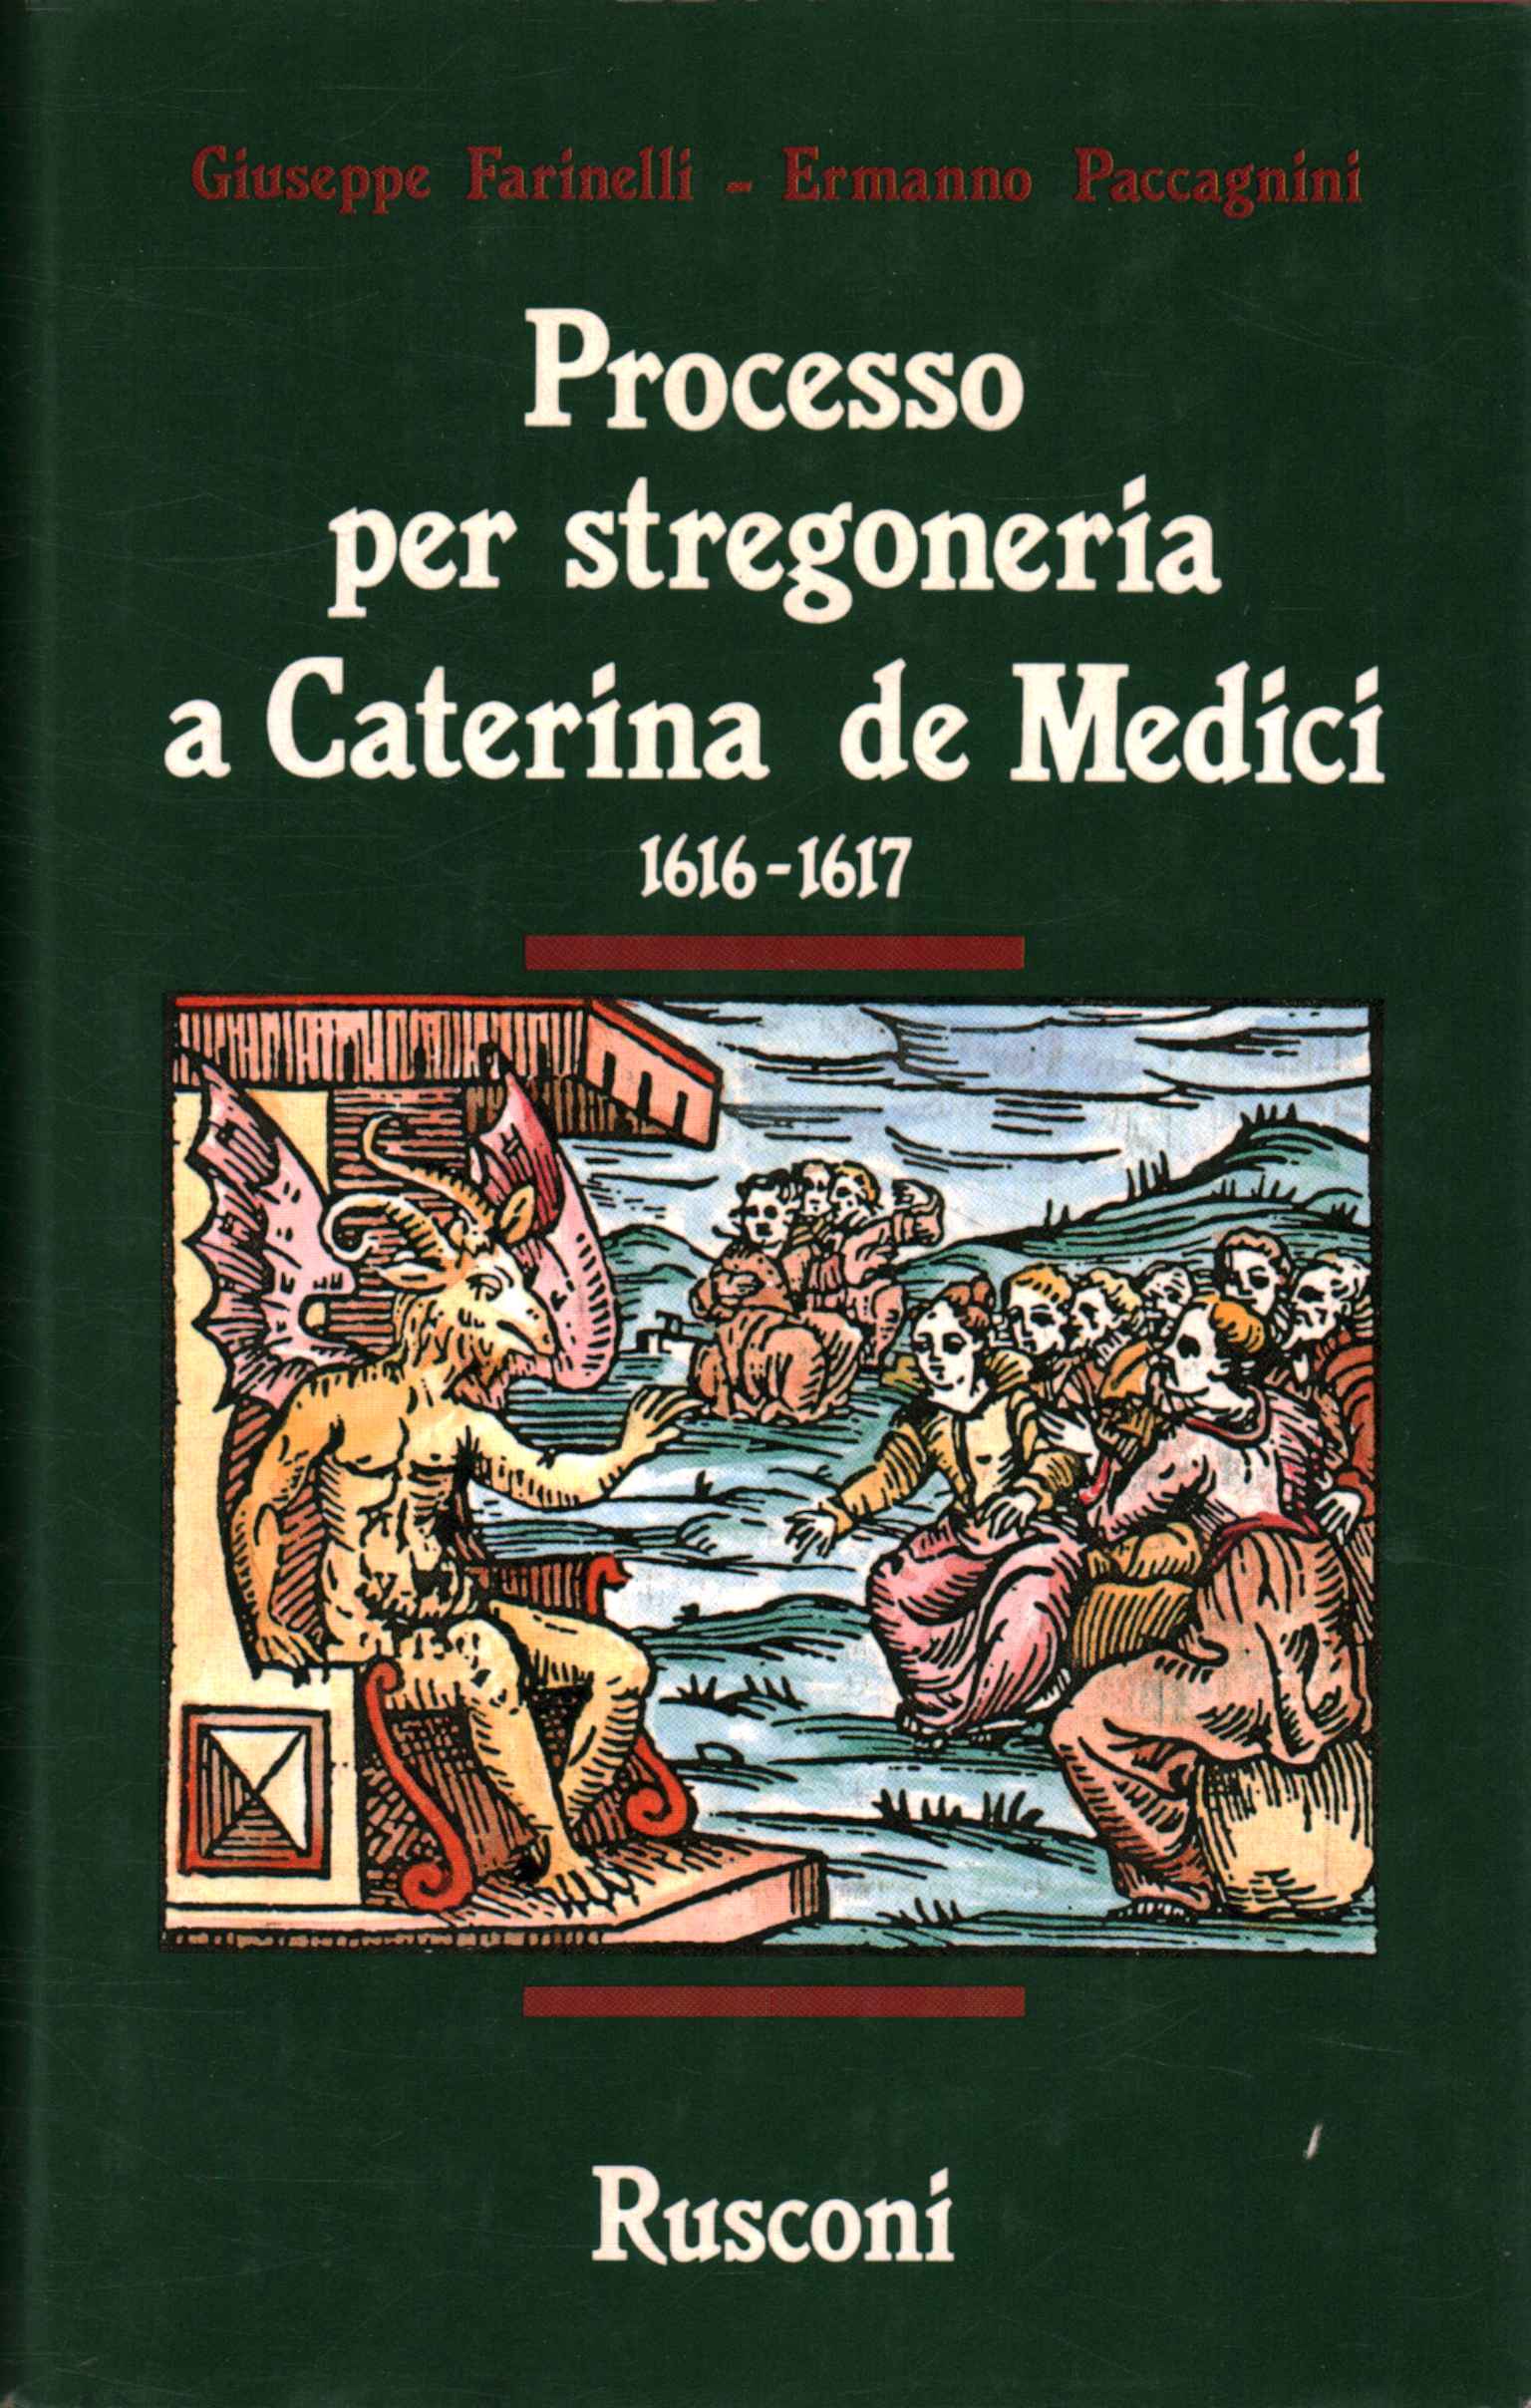 Trial for witchcraft of Caterina de%2,Trial for witchcraft of Caterina de%2